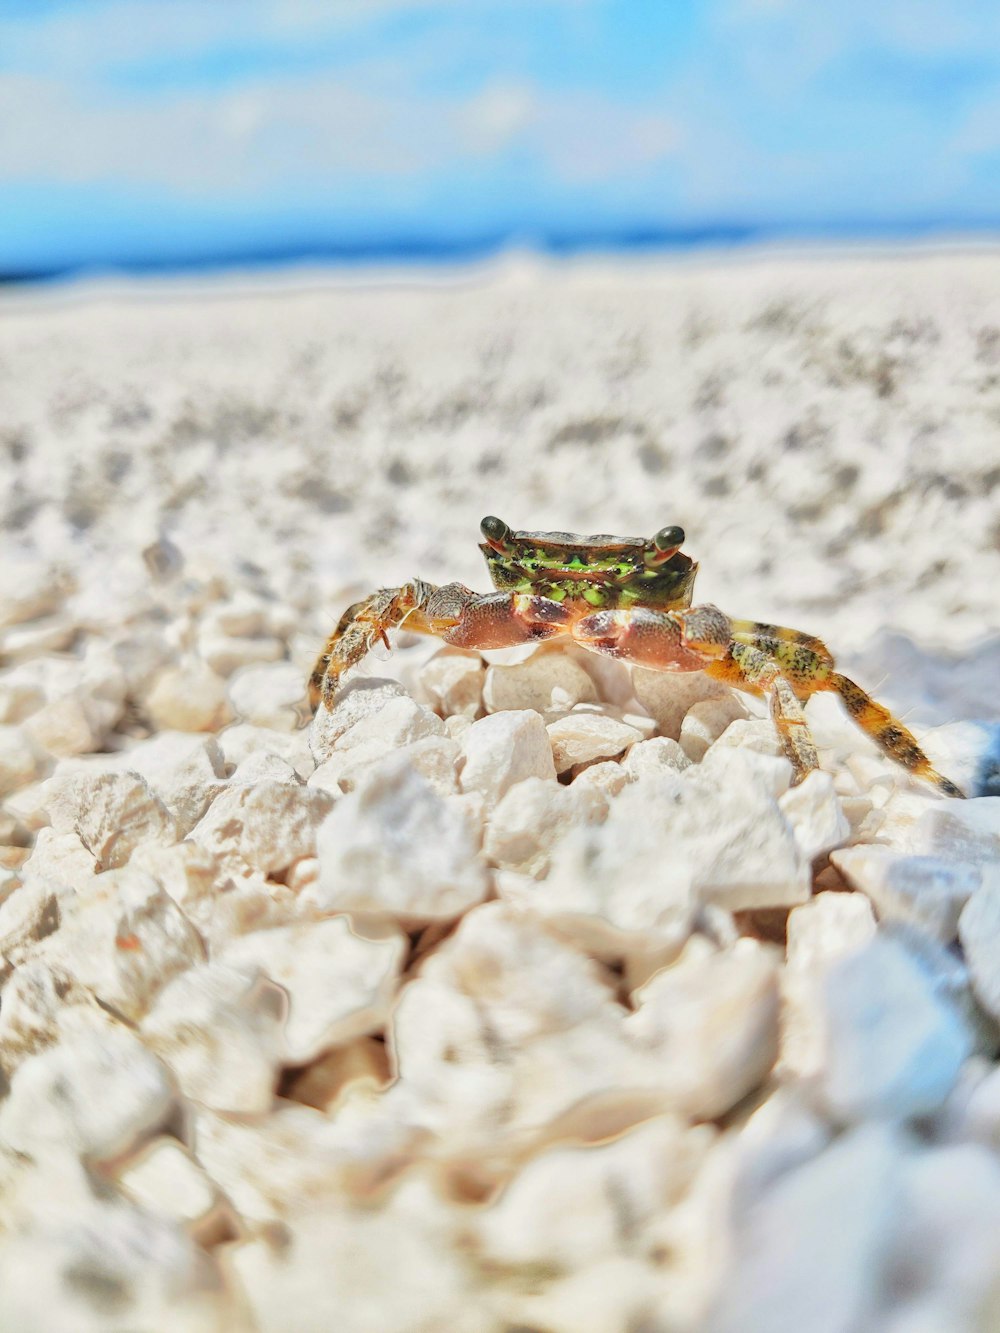 brown and green crab on white and brown rocks